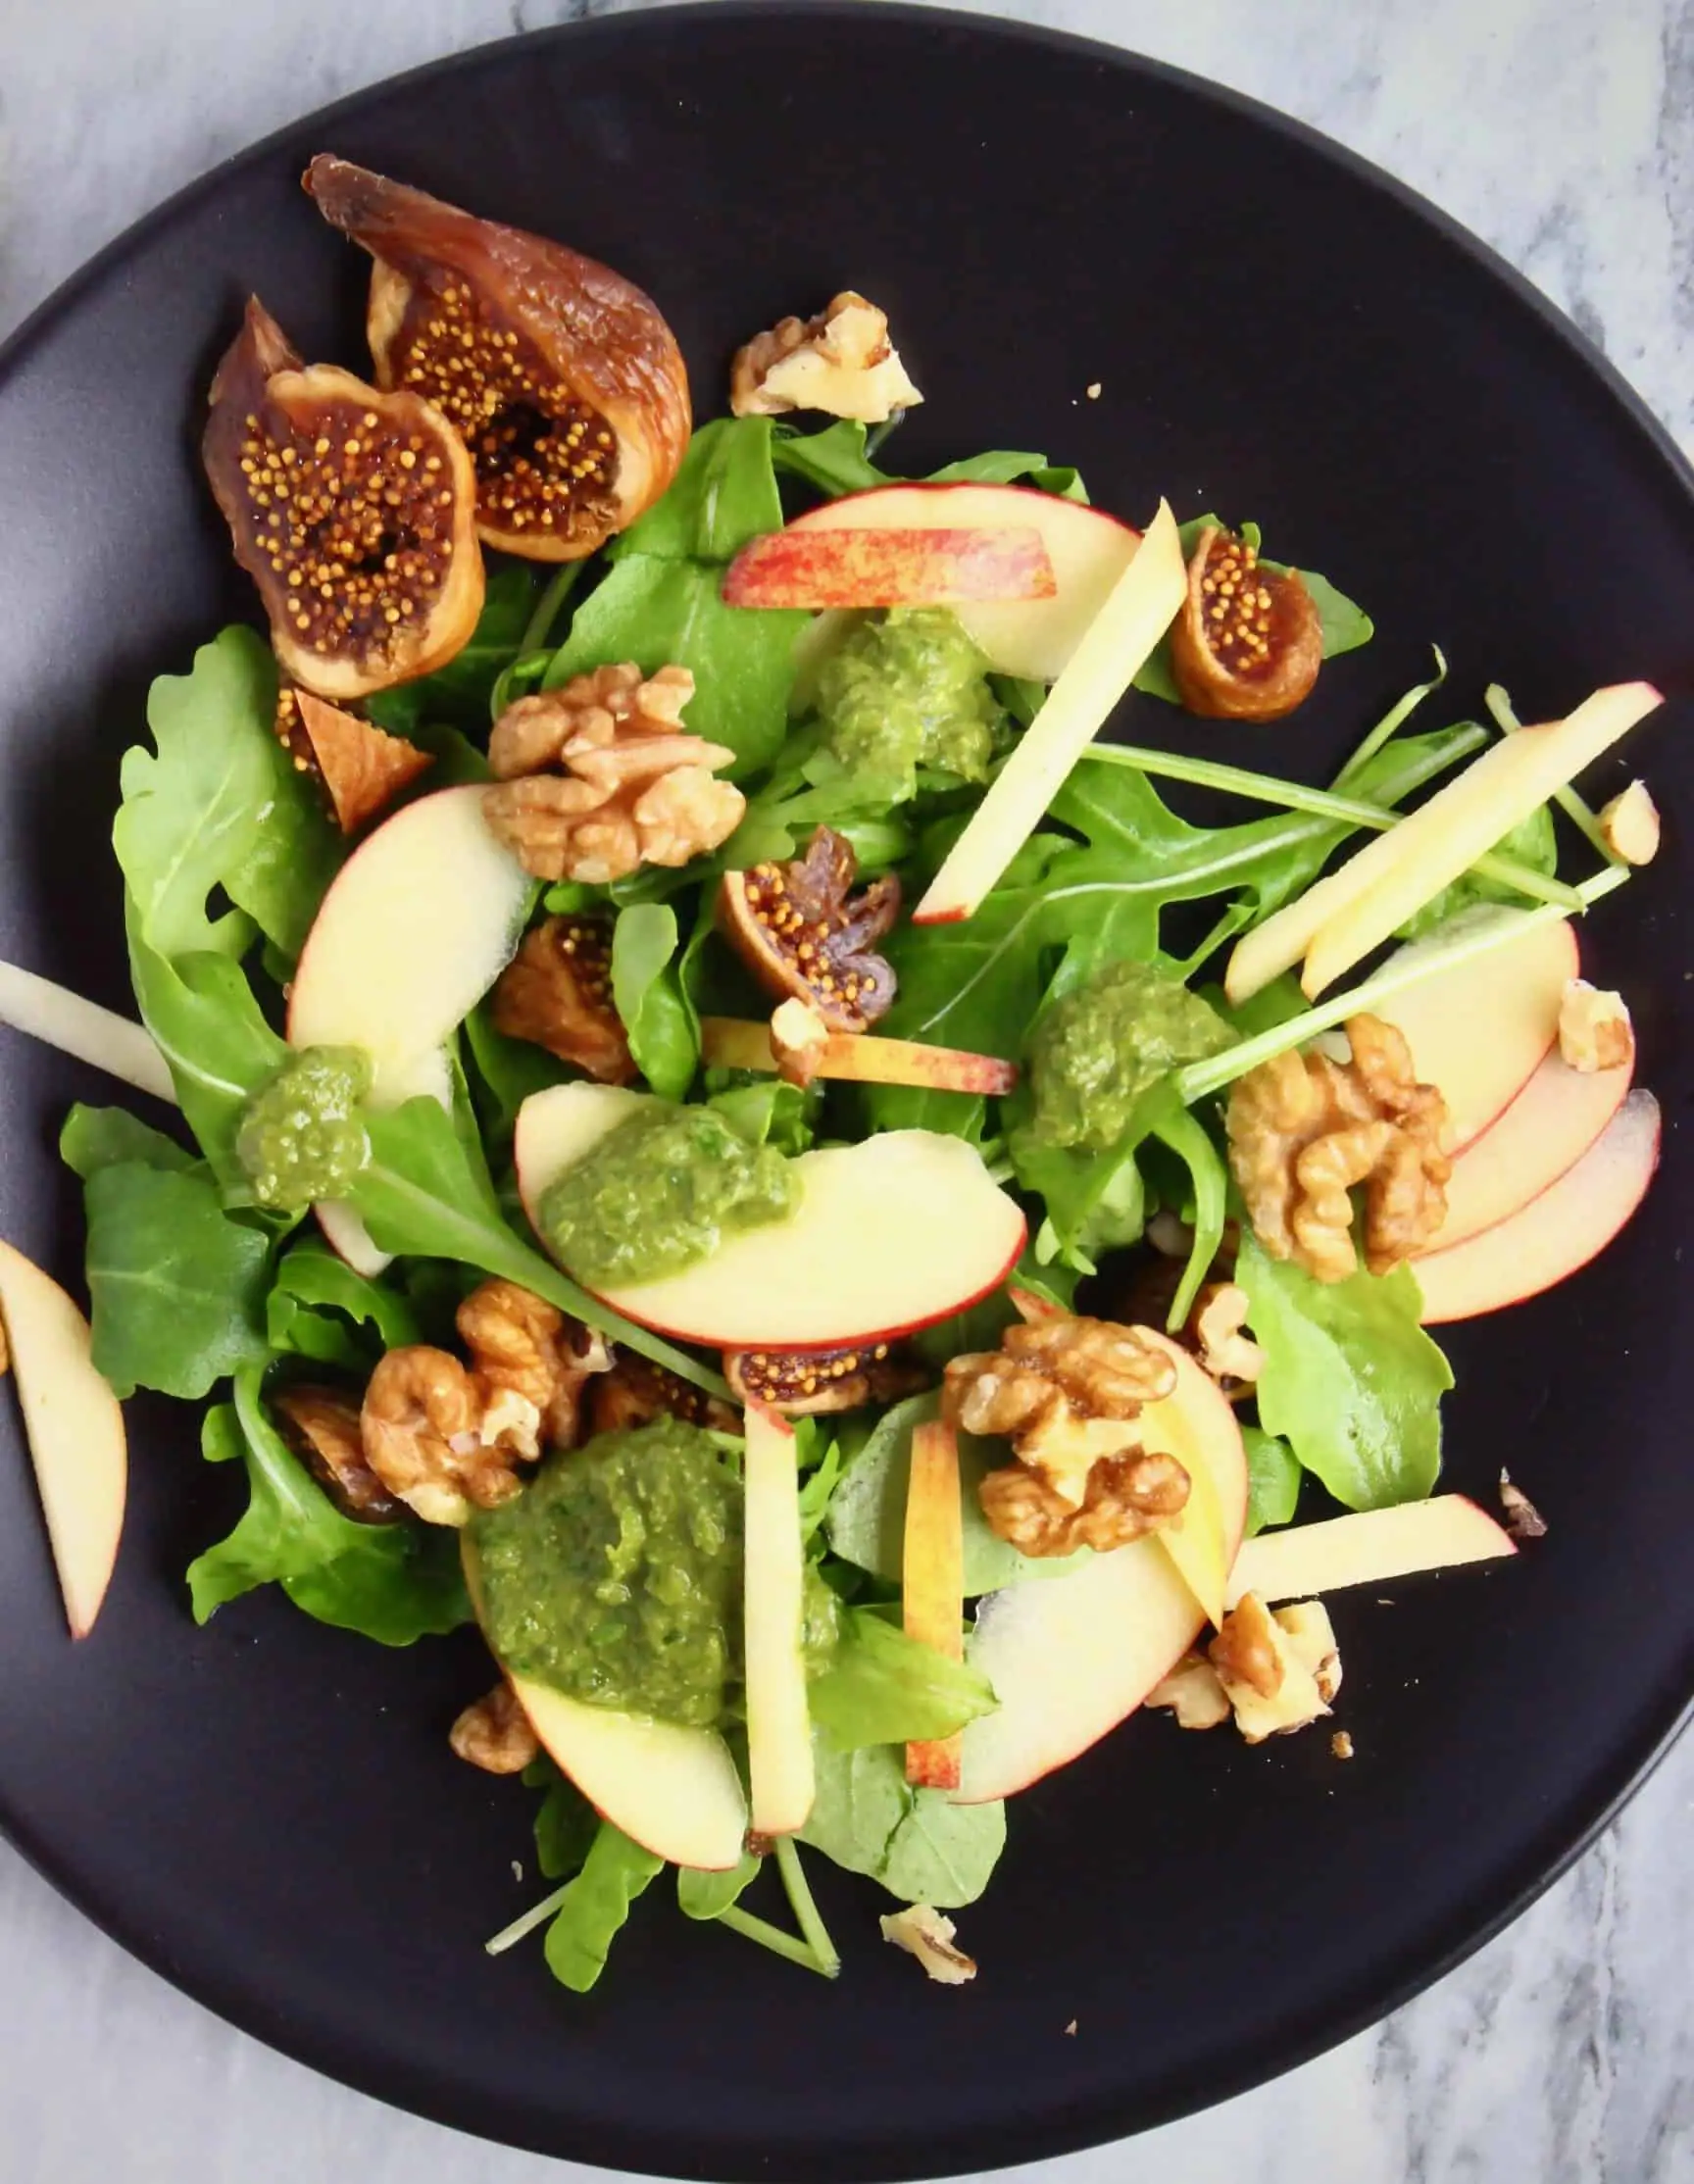 Apple slices, chopped dried figs, rocket and walnuts covered in a green pesto dressing on a black plate against a marble background